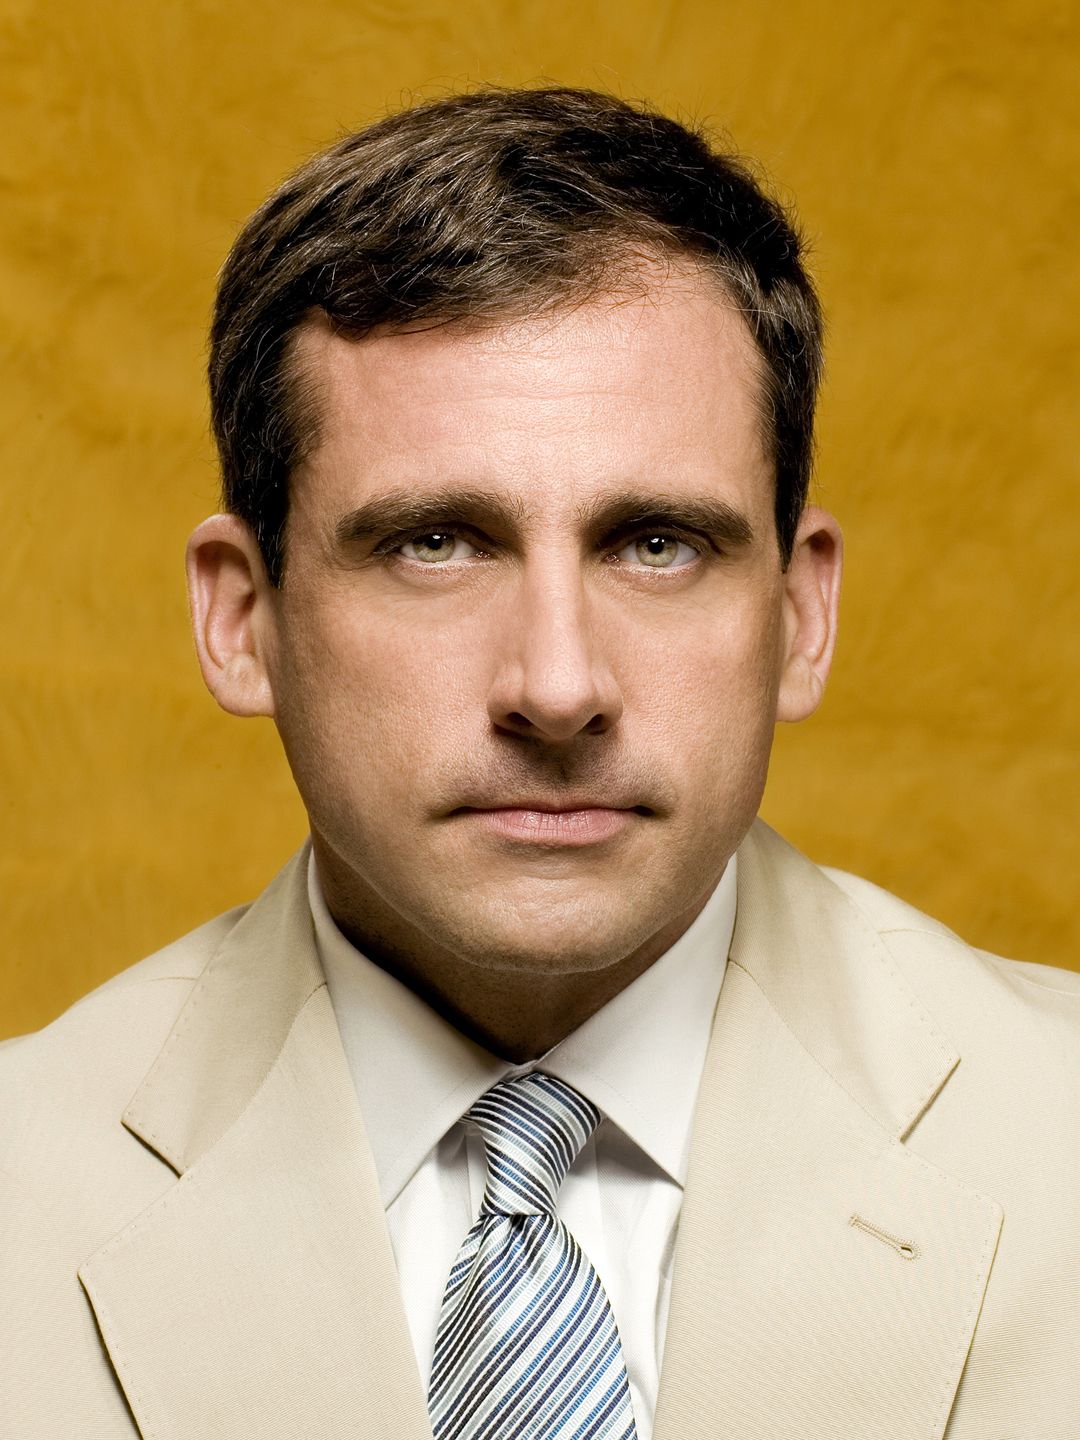 Steve Carell who is his mother